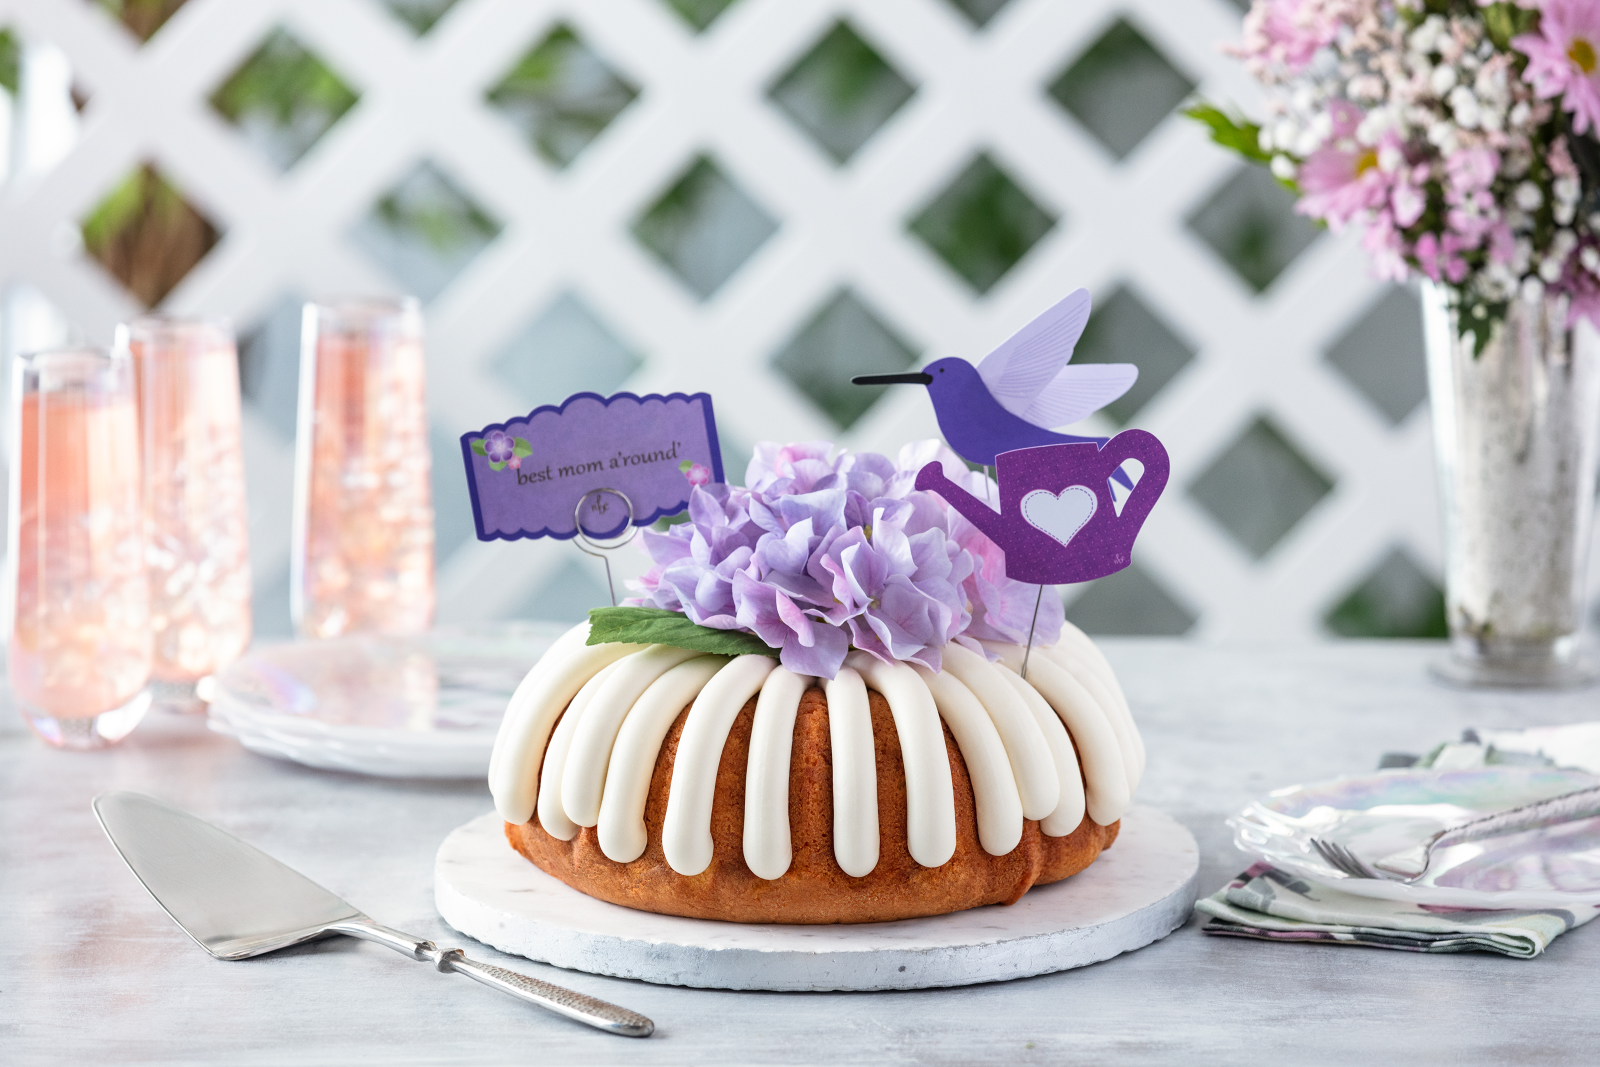 Homemade Lemon Bundt Cake With Icing Sugar And Burning Candles Stock Photo  - Download Image Now - iStock